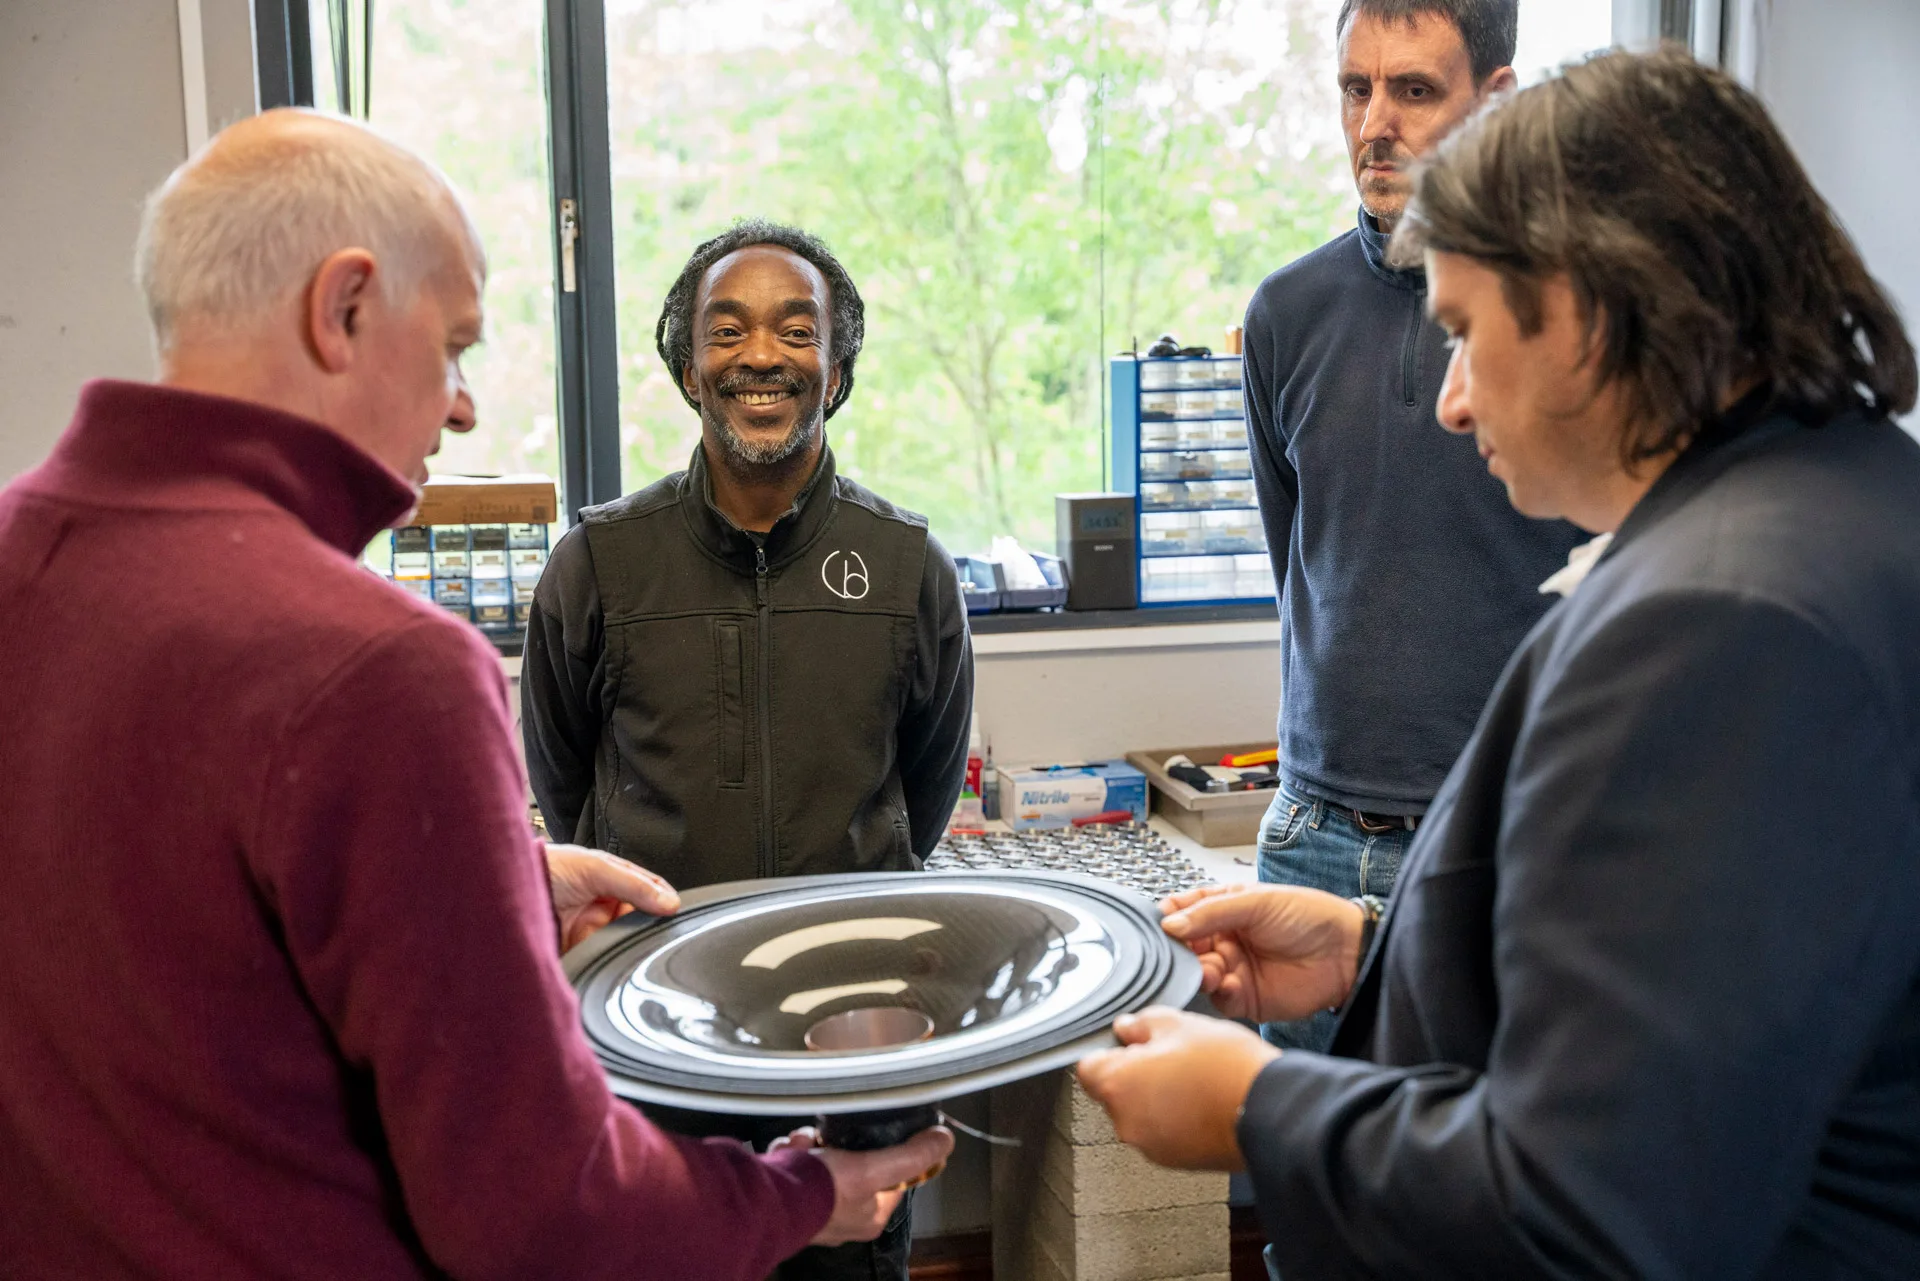 Production Technicians Mark and Richard showing George the IGx production and the carbon-PTFE diaphragm that Wilson Benesch manufactures